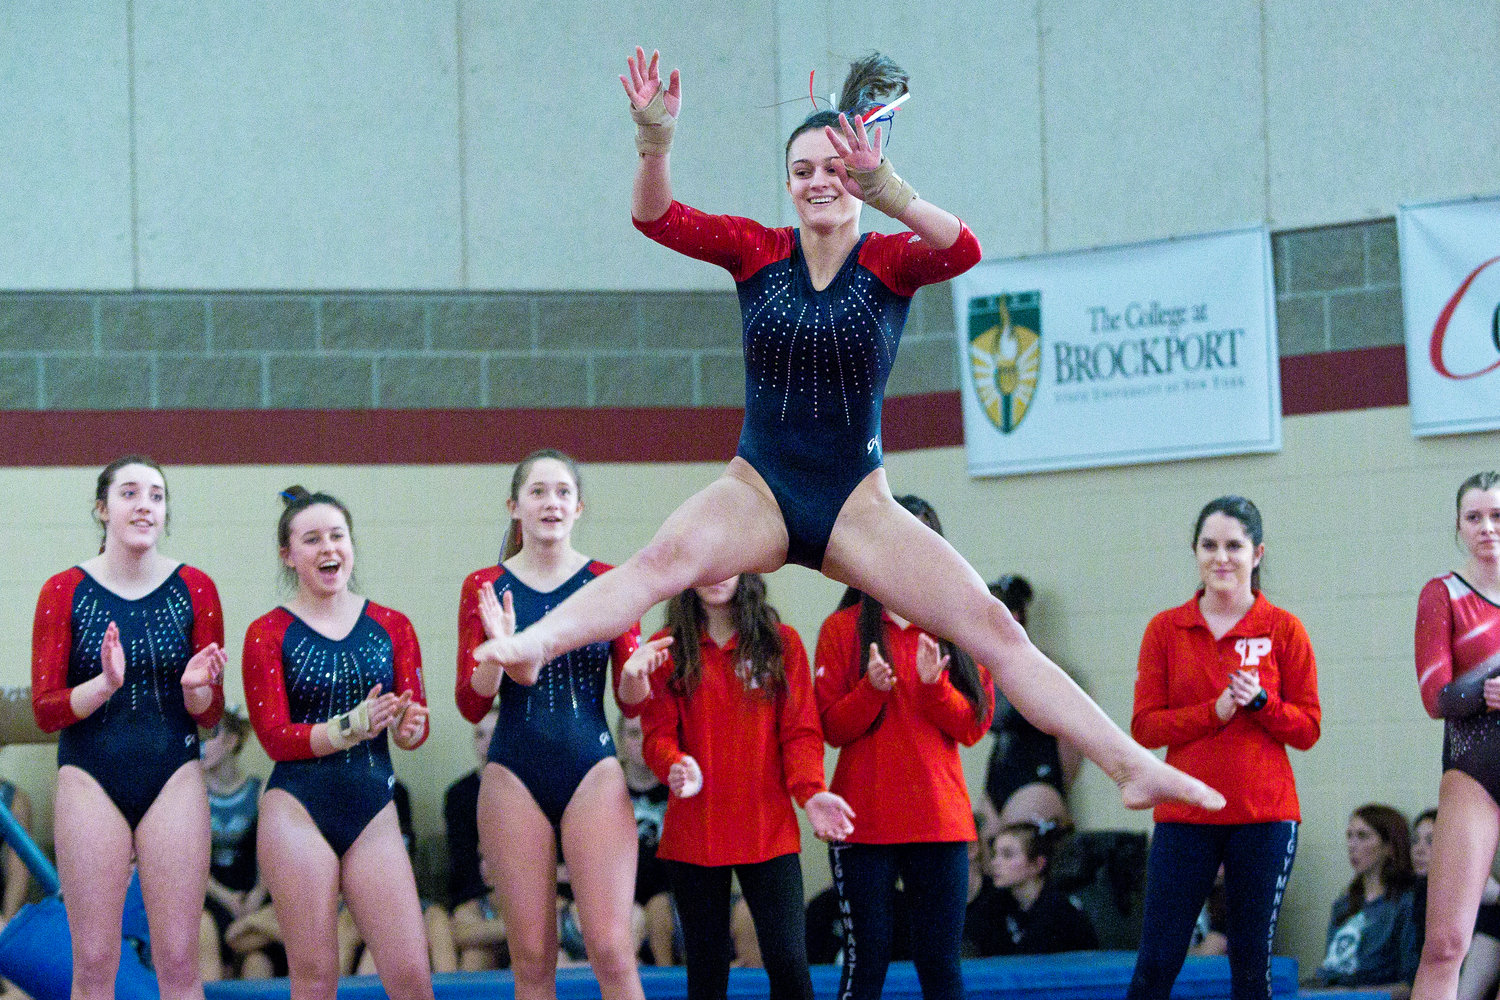 Portsmouth Gymnasts Come In Third Place In State Championship